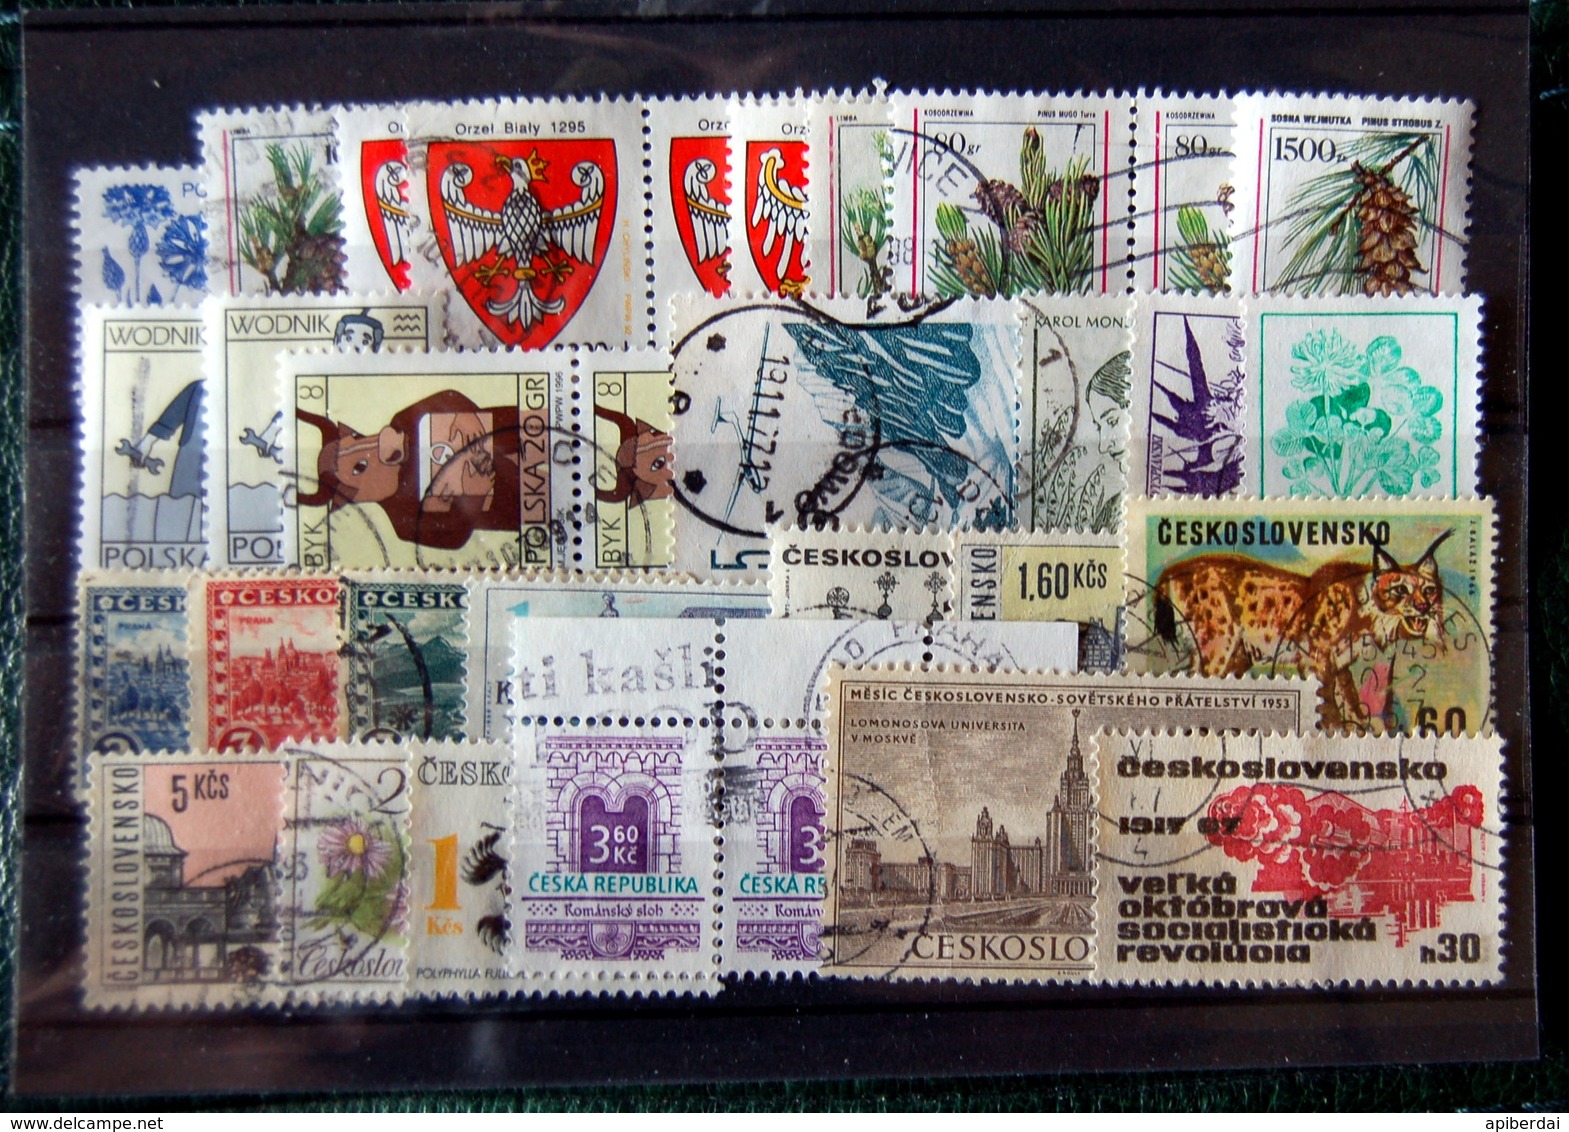 Pays De L'est - 32 Stamps Used From Poland & Ceskoslovenko - Lots & Kiloware (mixtures) - Max. 999 Stamps